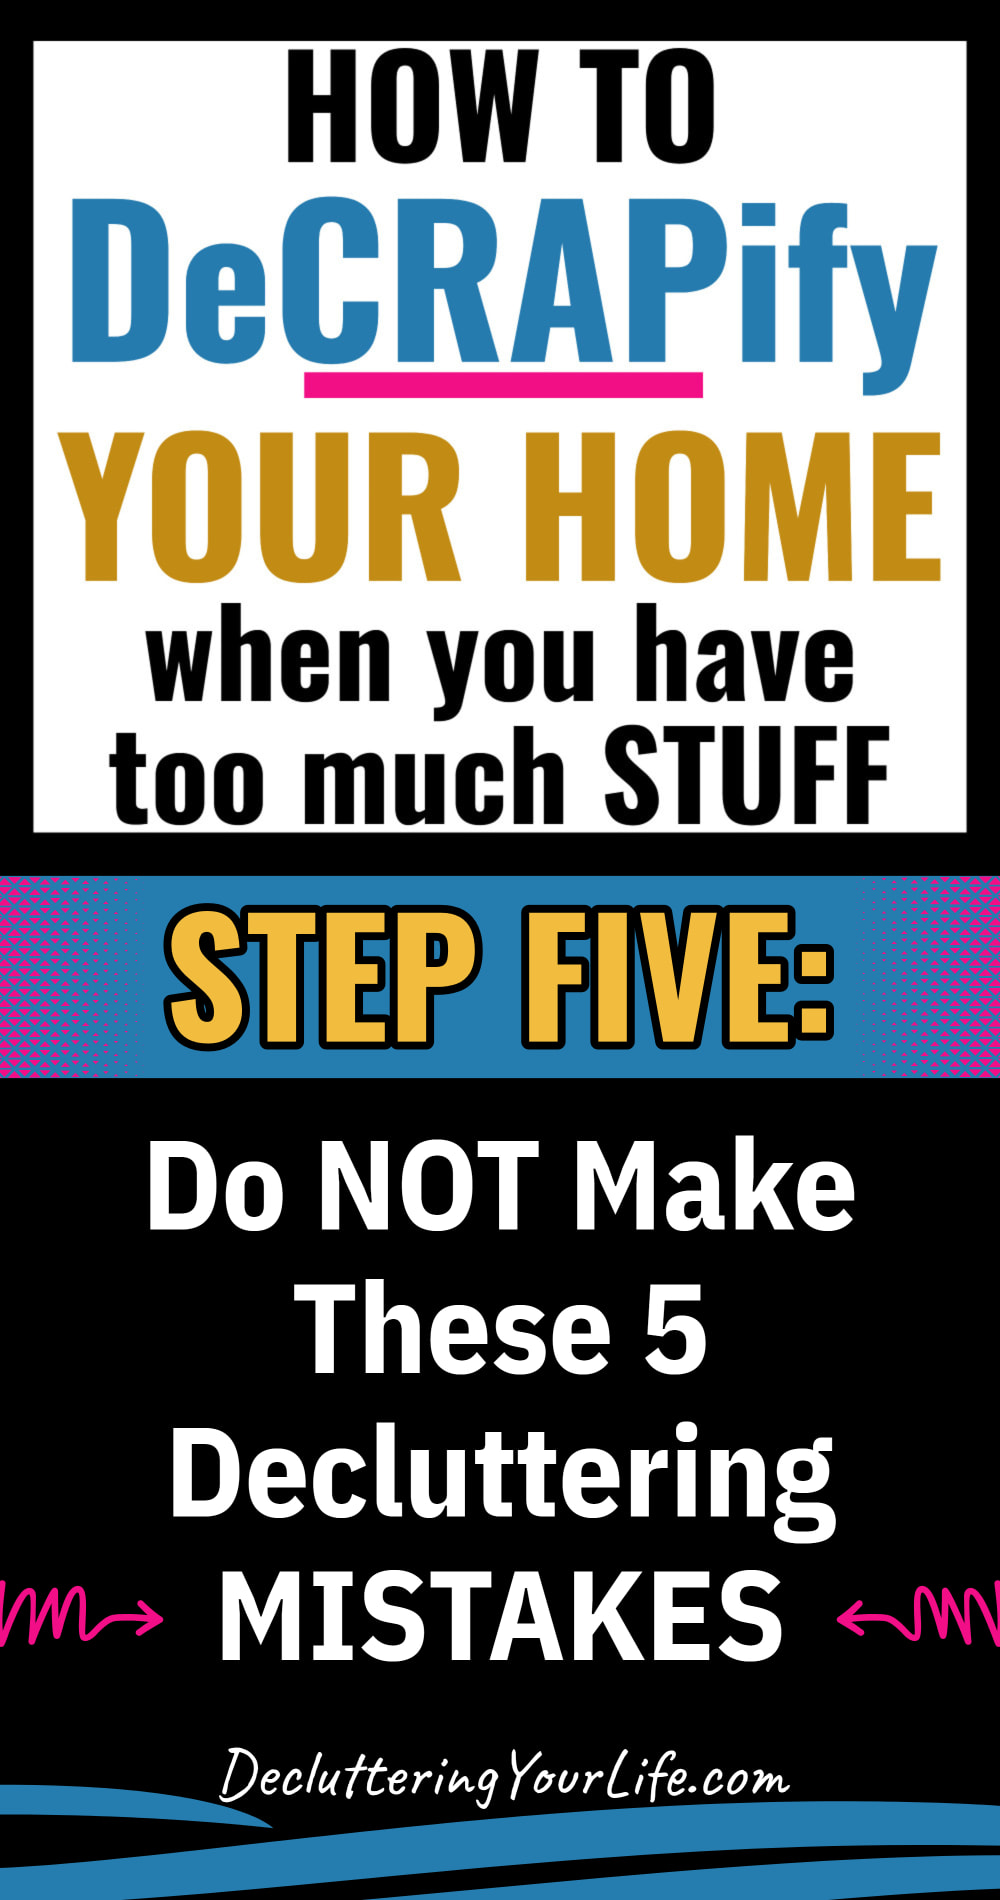 Decrapify your home step 5 - decluttering mistakes